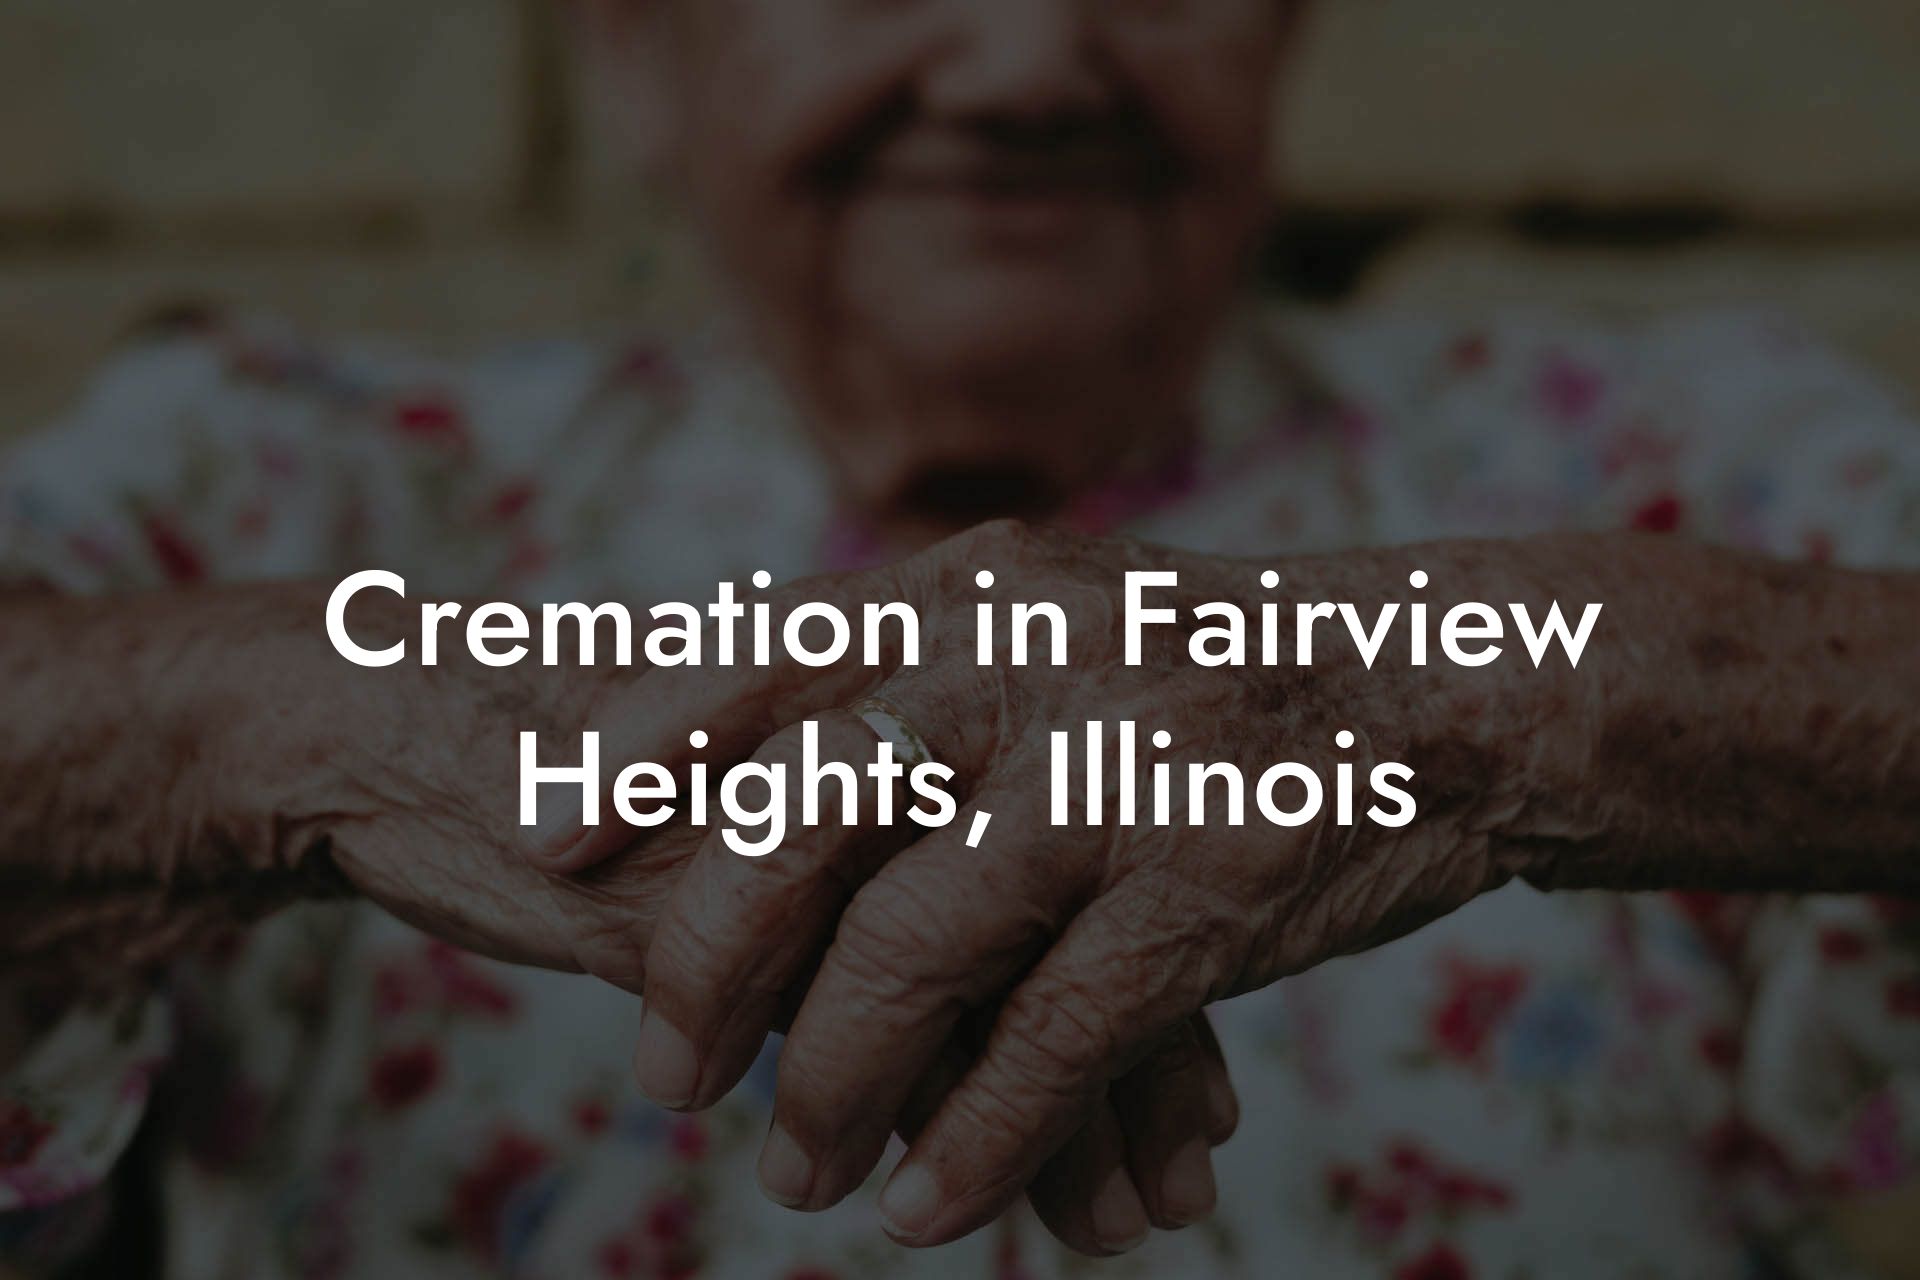 Cremation in Fairview Heights, Illinois